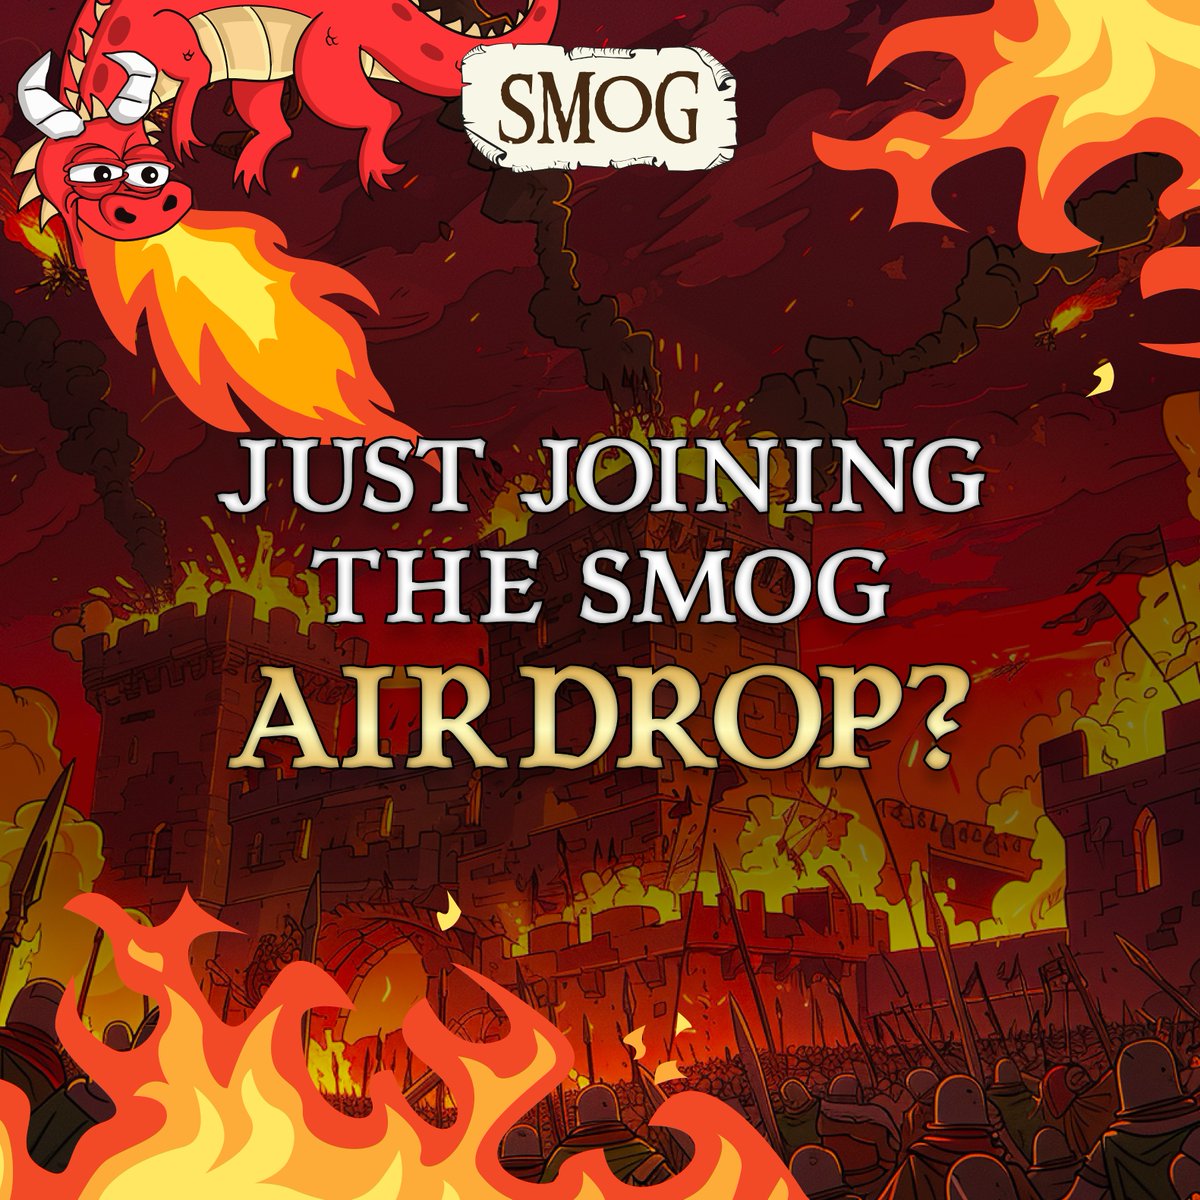 Just joining the #SMOG #Airdrop? 🎉 Not sure where to start? 🤔 As we are currently soaring through Season 2! 🚀 The best way to get cracking and start levelling up your XP! 💪 Is by #Trading $SMOG! 🪂💰⬇️ bit.ly/BuySmog #SmogSwap #TradeSmog #Solana #Altcoins